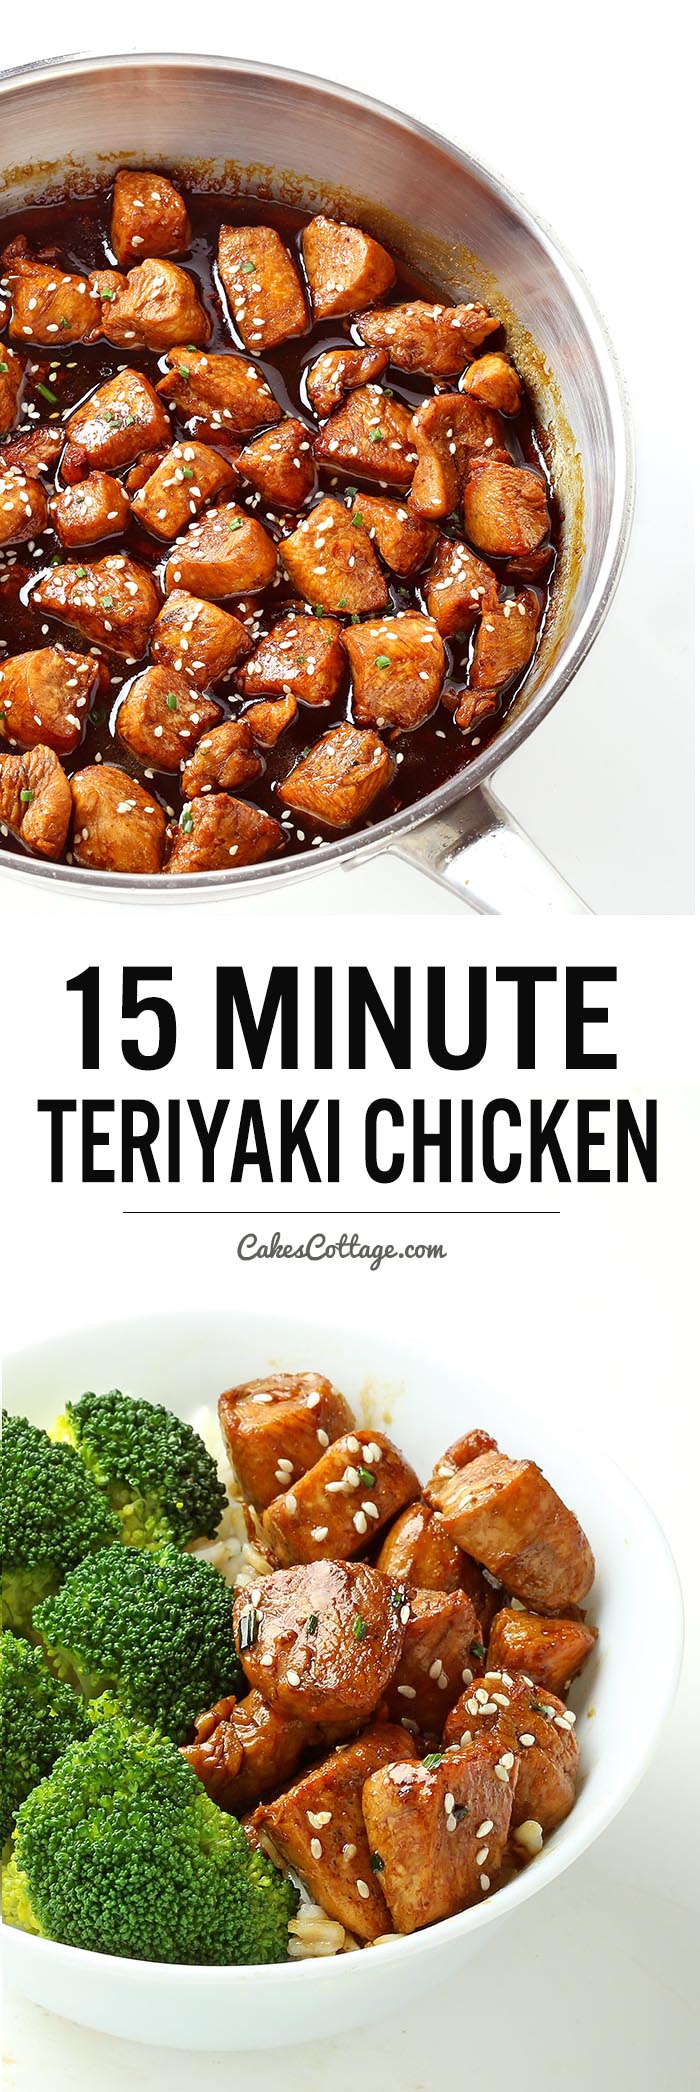 If you’re craving for plate of “mall food court” chicken teriyaki, then you’re going to love this Easy Teriyaki Chicken. So simple and Tasty!